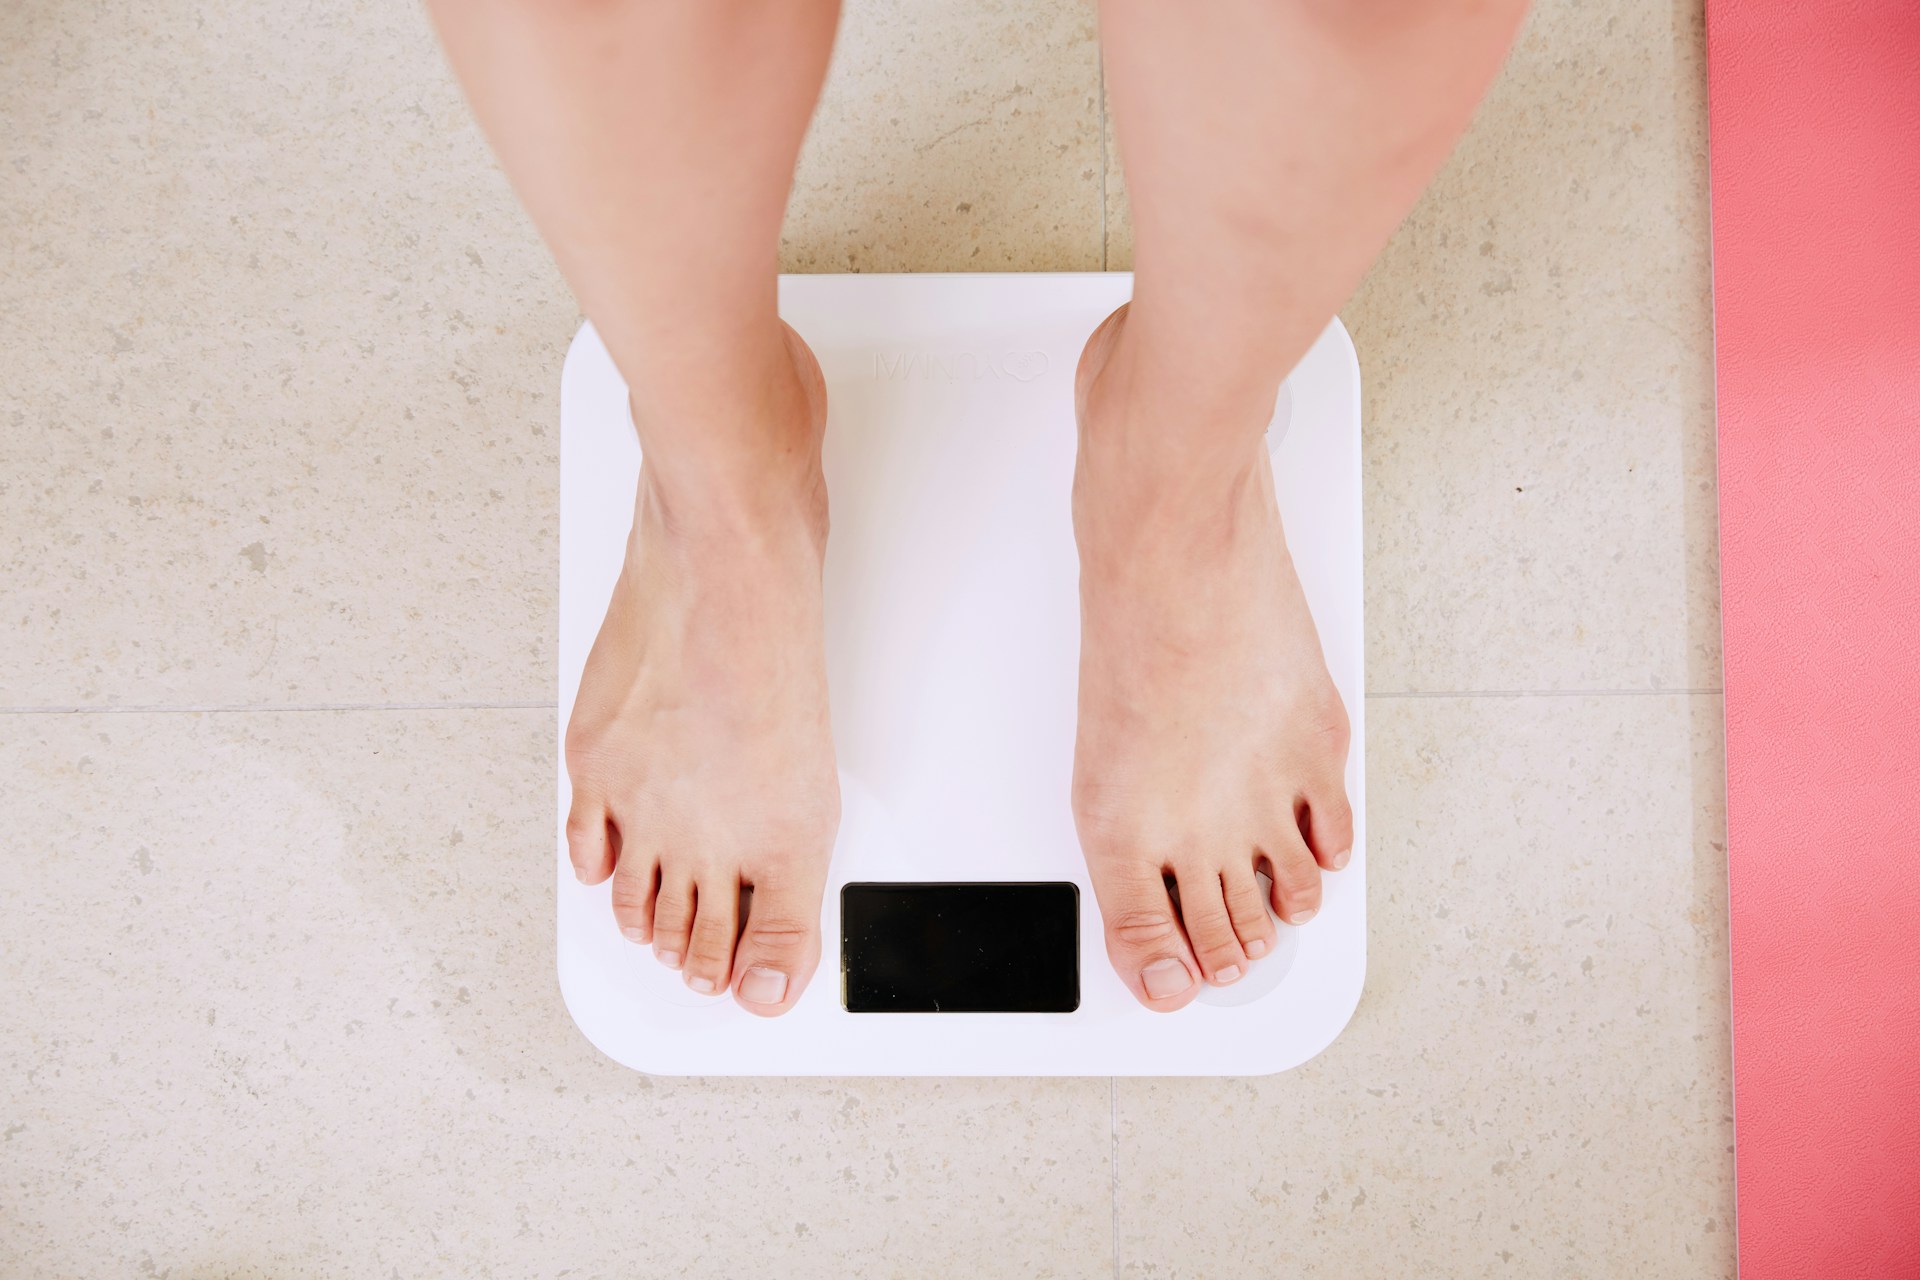 A person standing on bathroom weighing scales